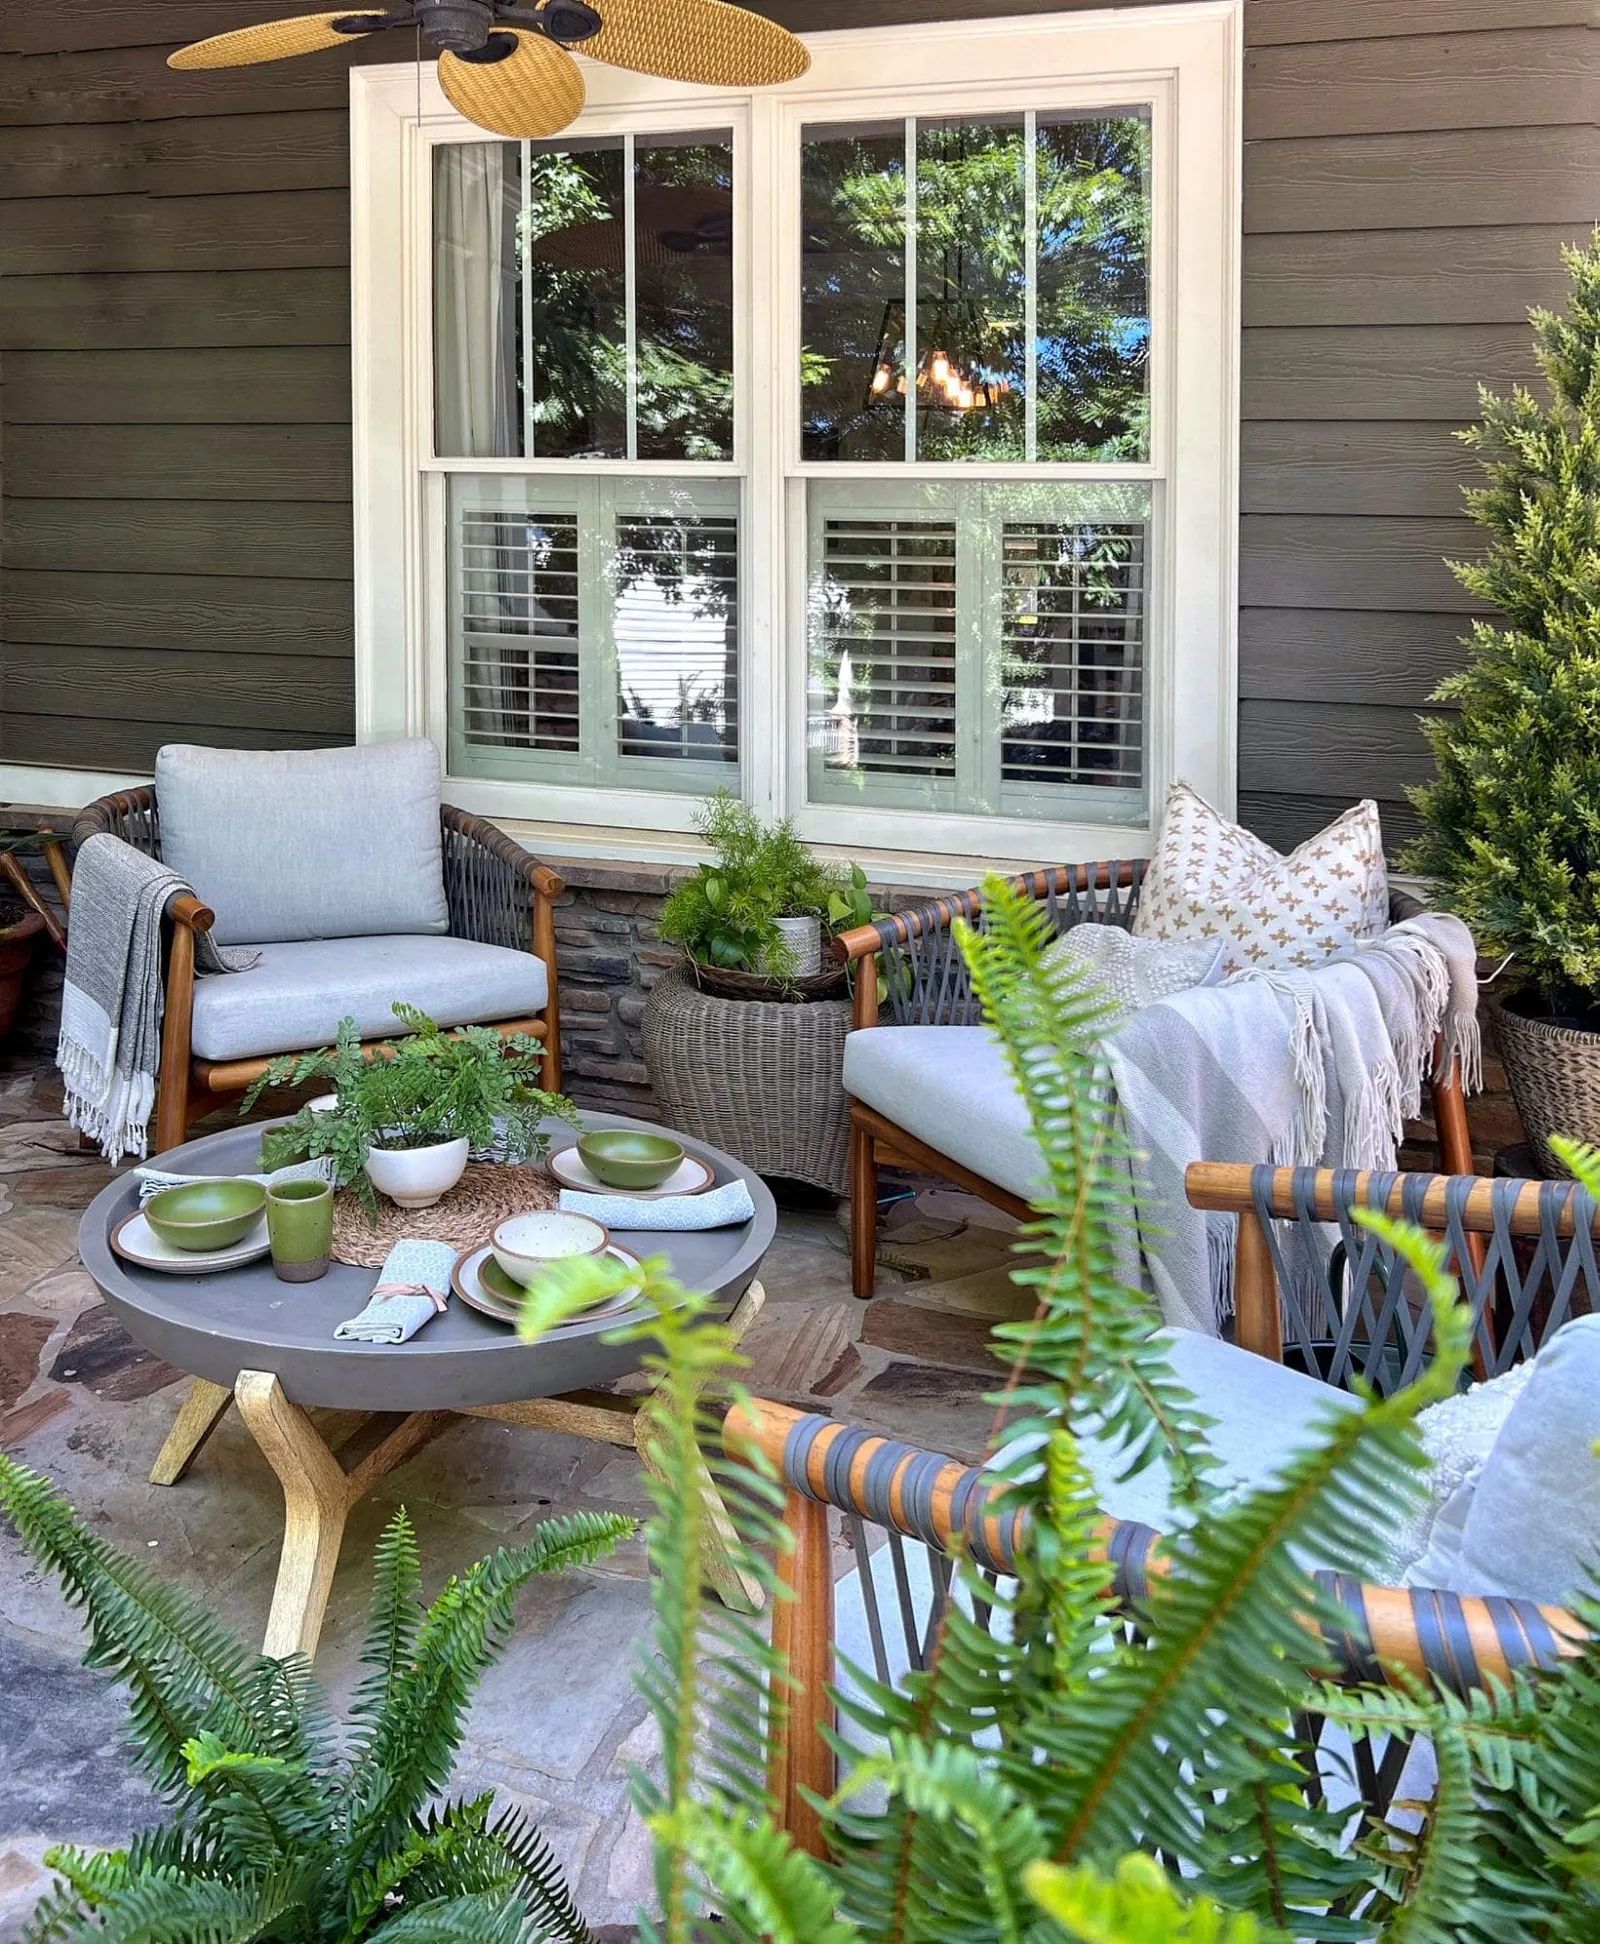 An outdoor seating area dressed up for spring: with Fiddlehead pottery, fiddlehead ferns, and cozy blankets thrown on patio furniture.